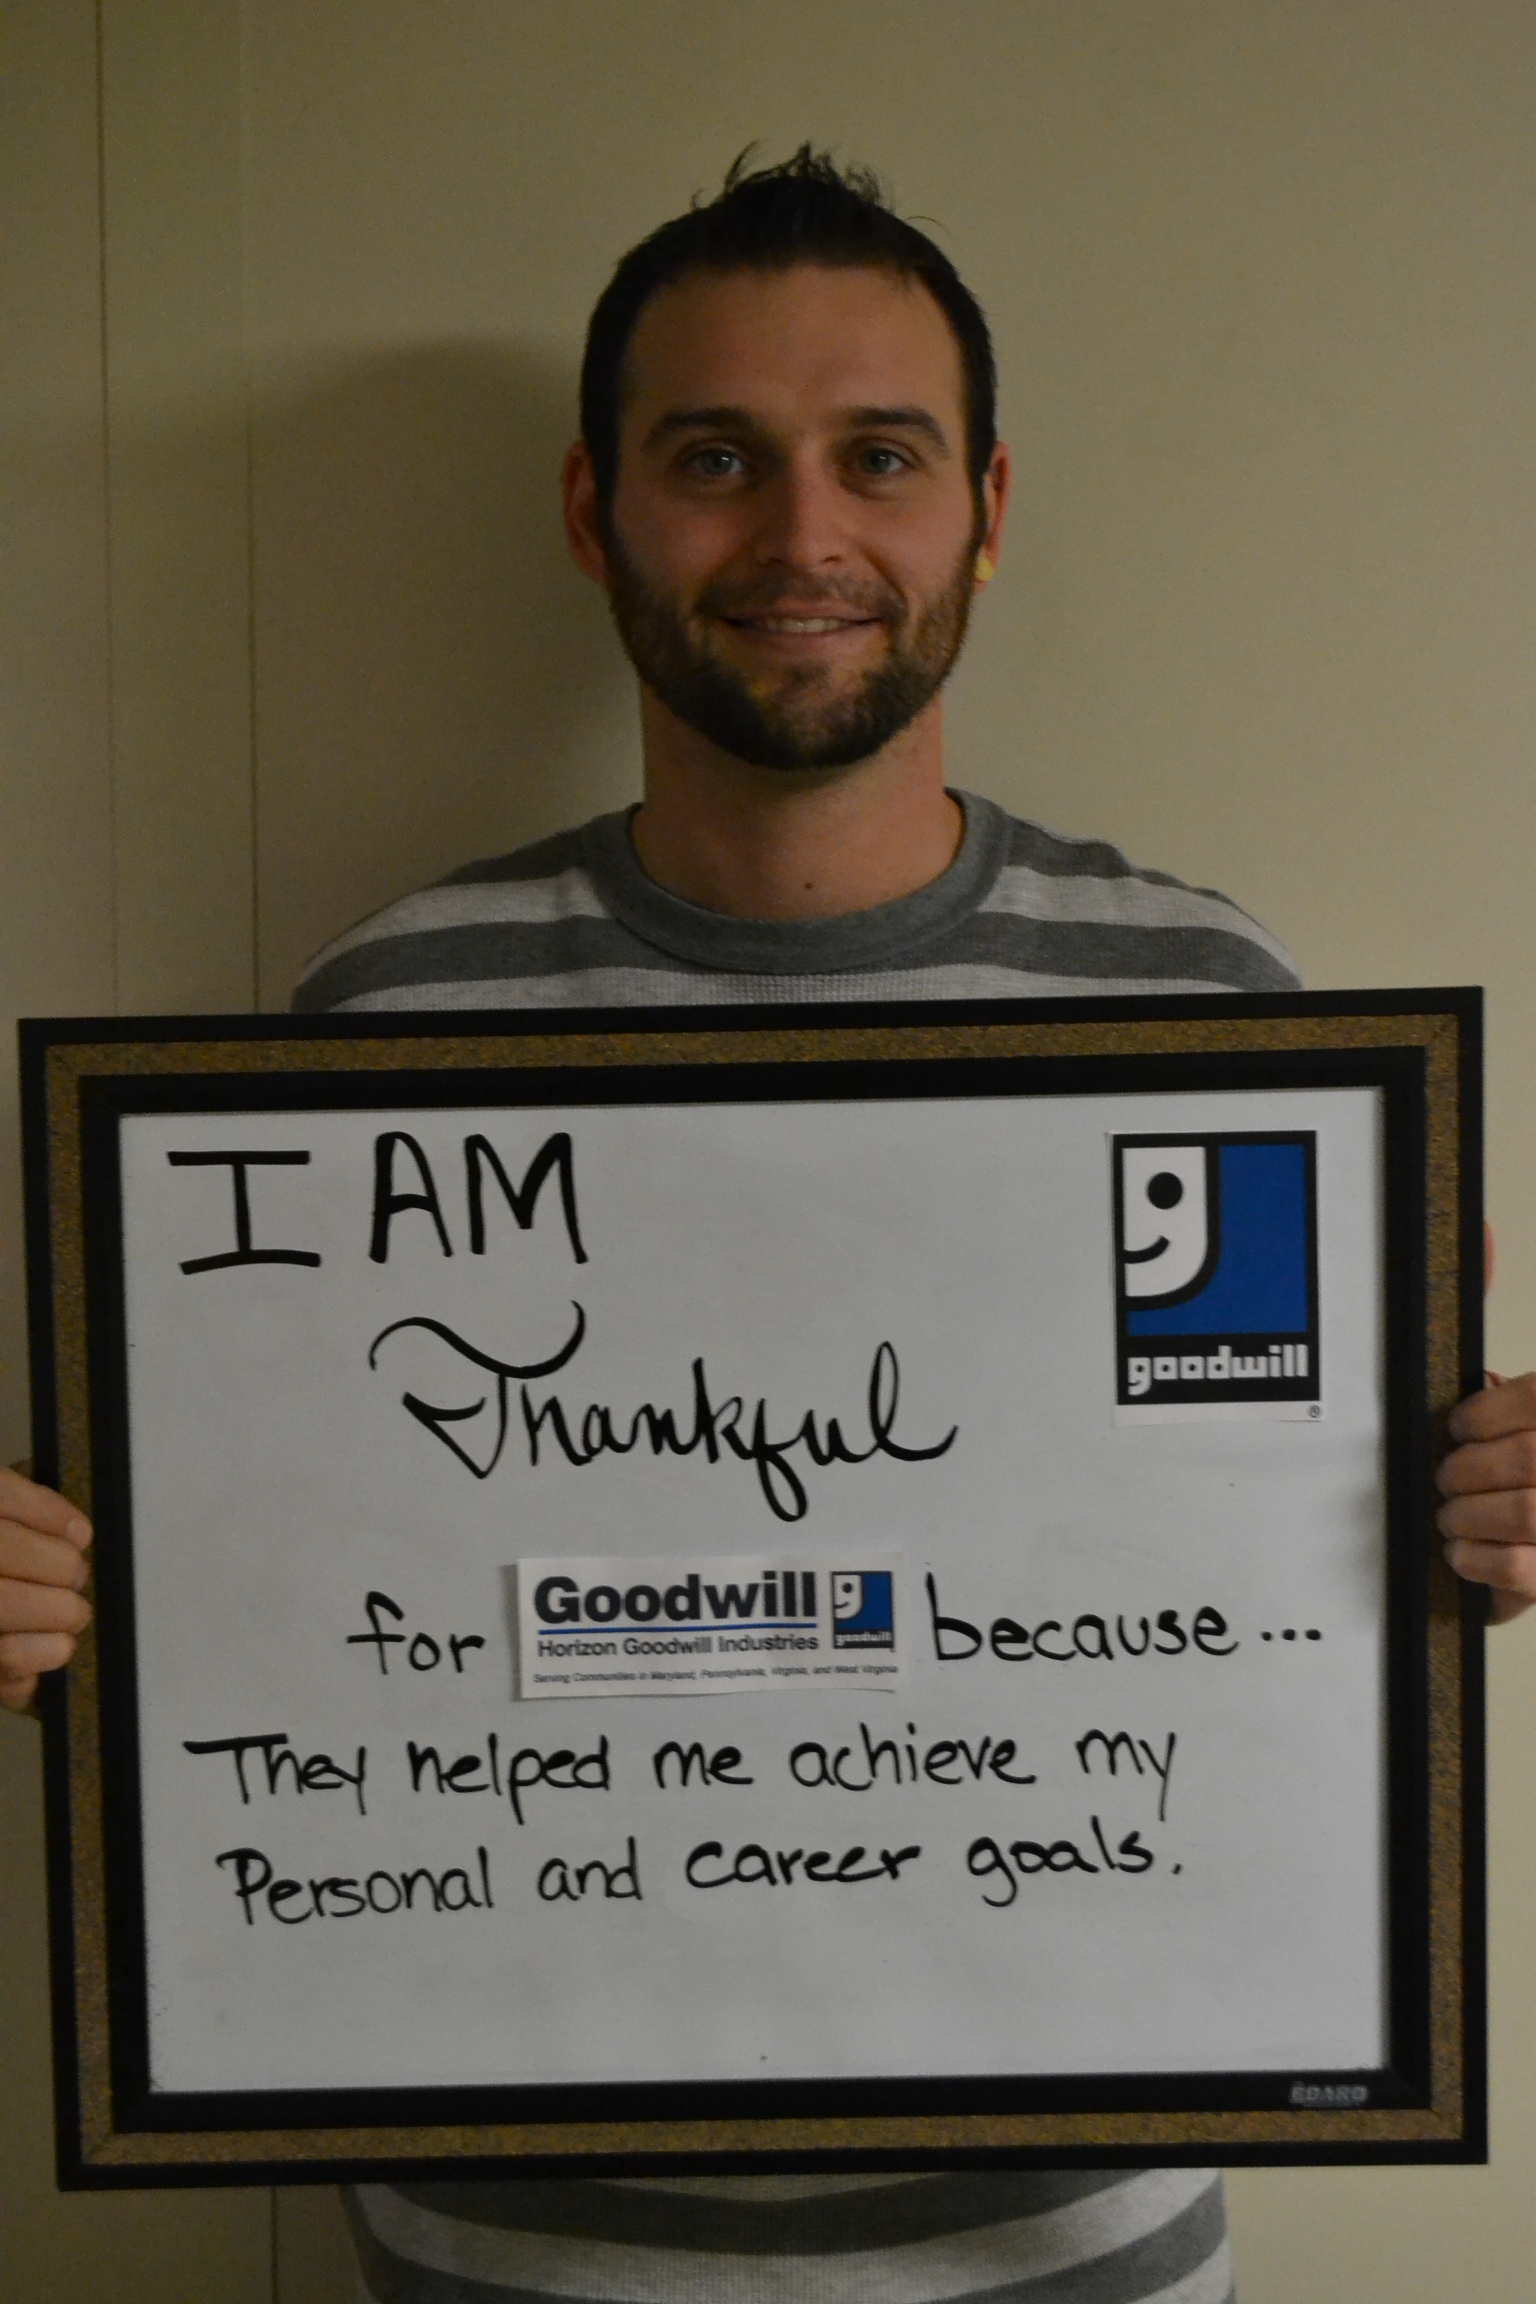 Horizon Goodwill Helped Me Achieve My Personal & Career Goals